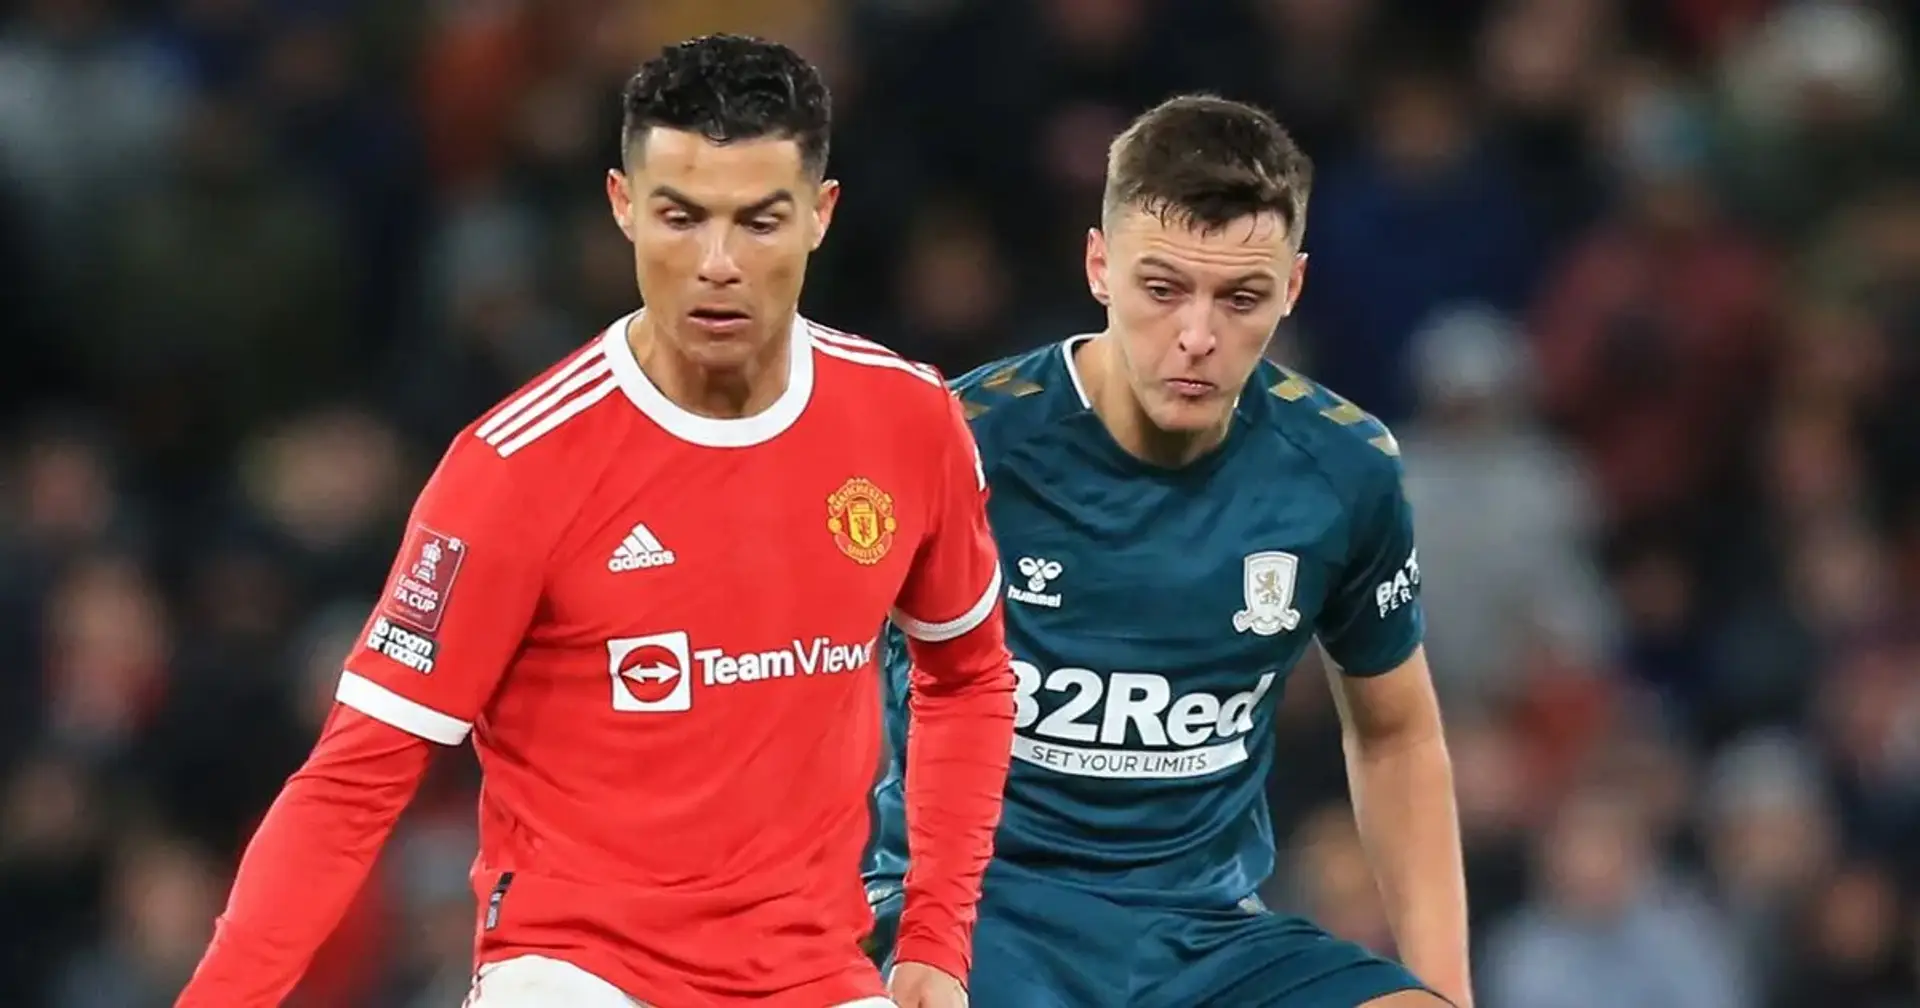 'He's so beautiful in real life!' Boro defender Dael Fry shares emotions after facing Ronaldo